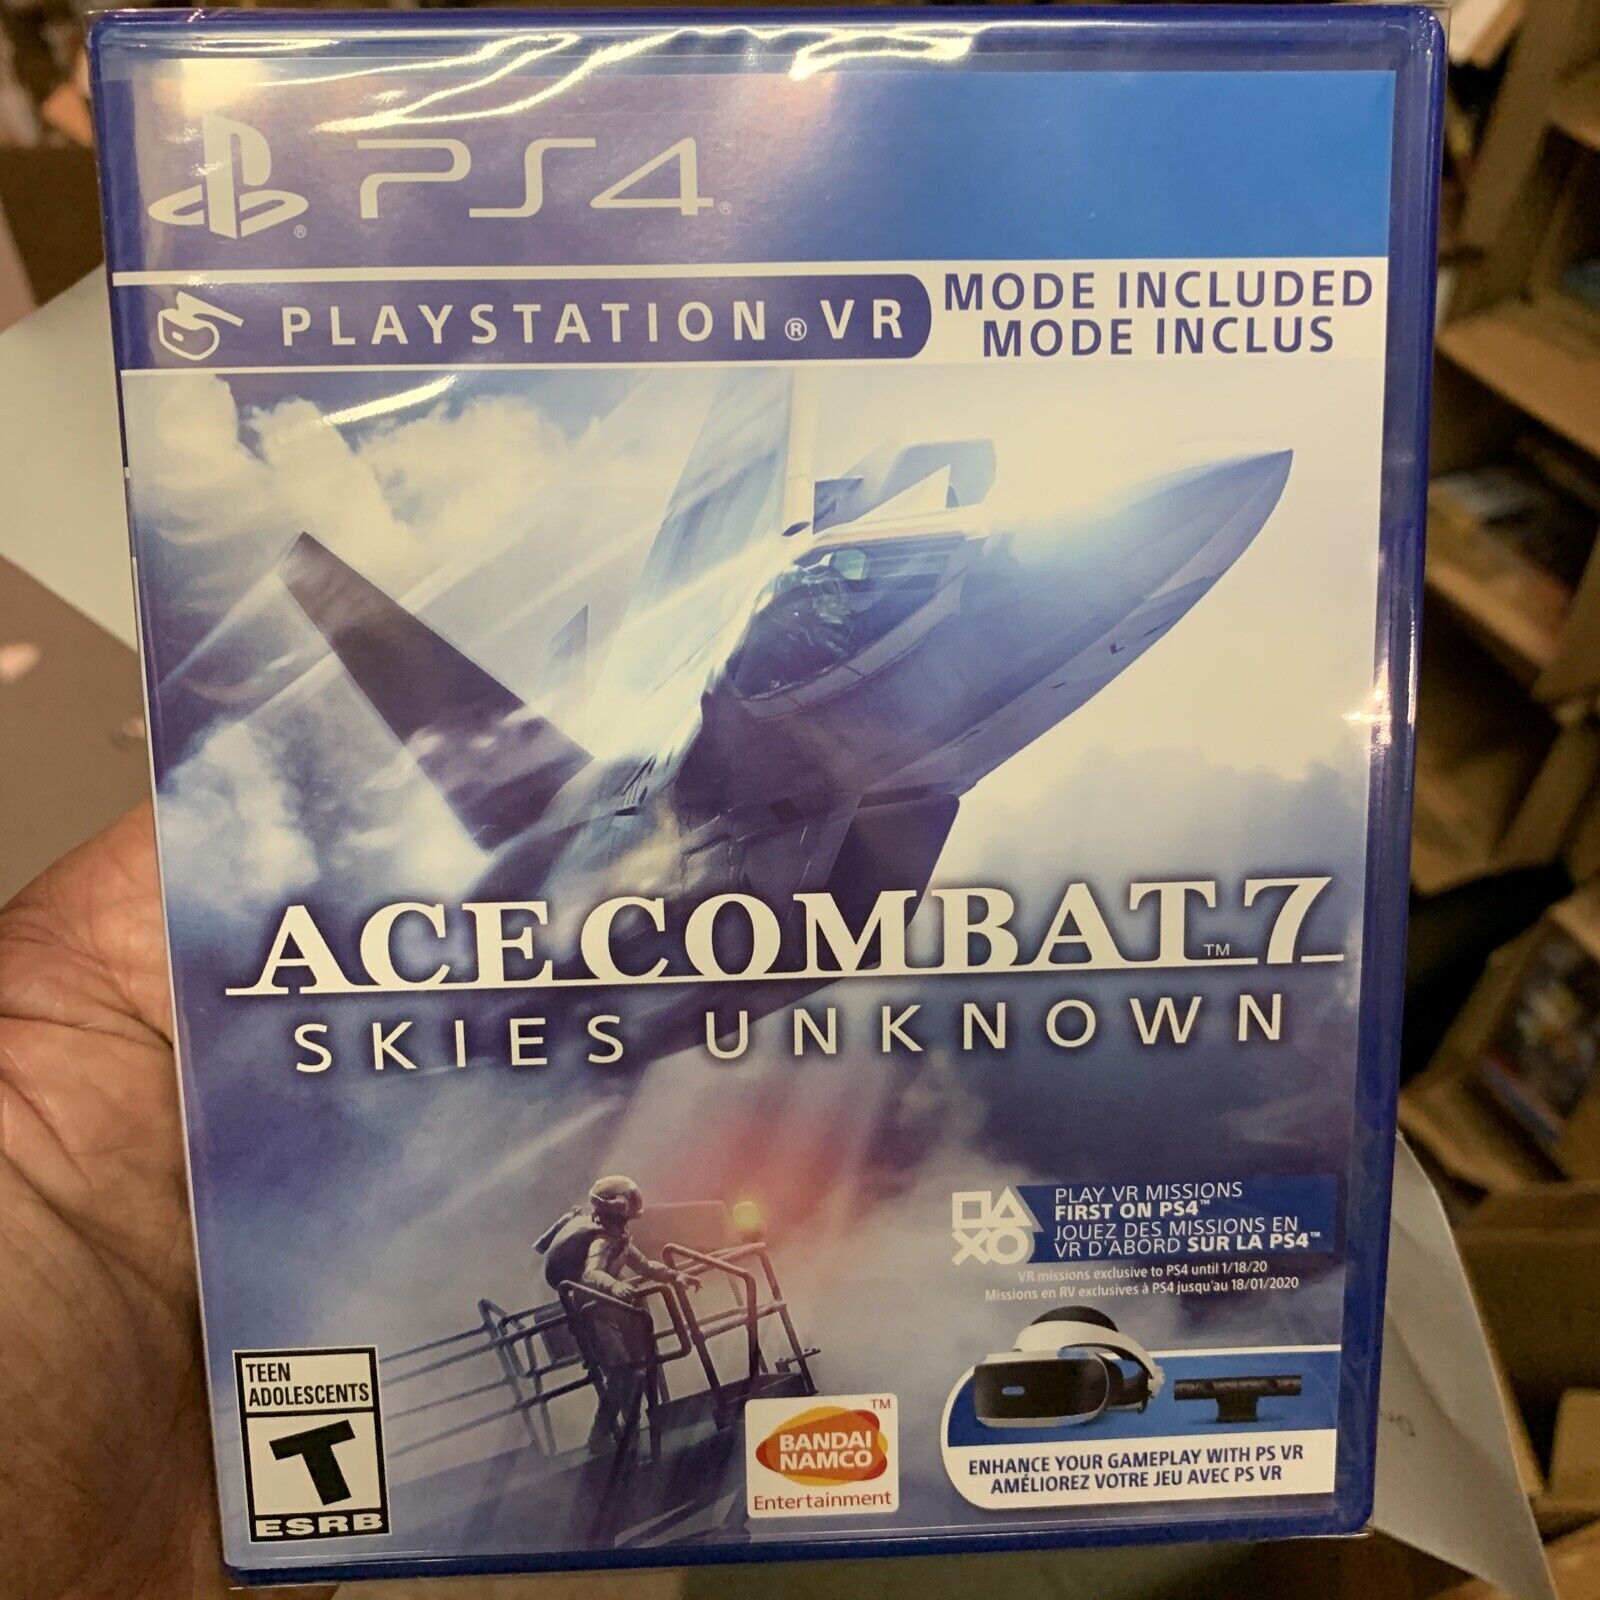 Ace Combat 7: Skies Unknown (PlayStation 4) PS4 722674120845